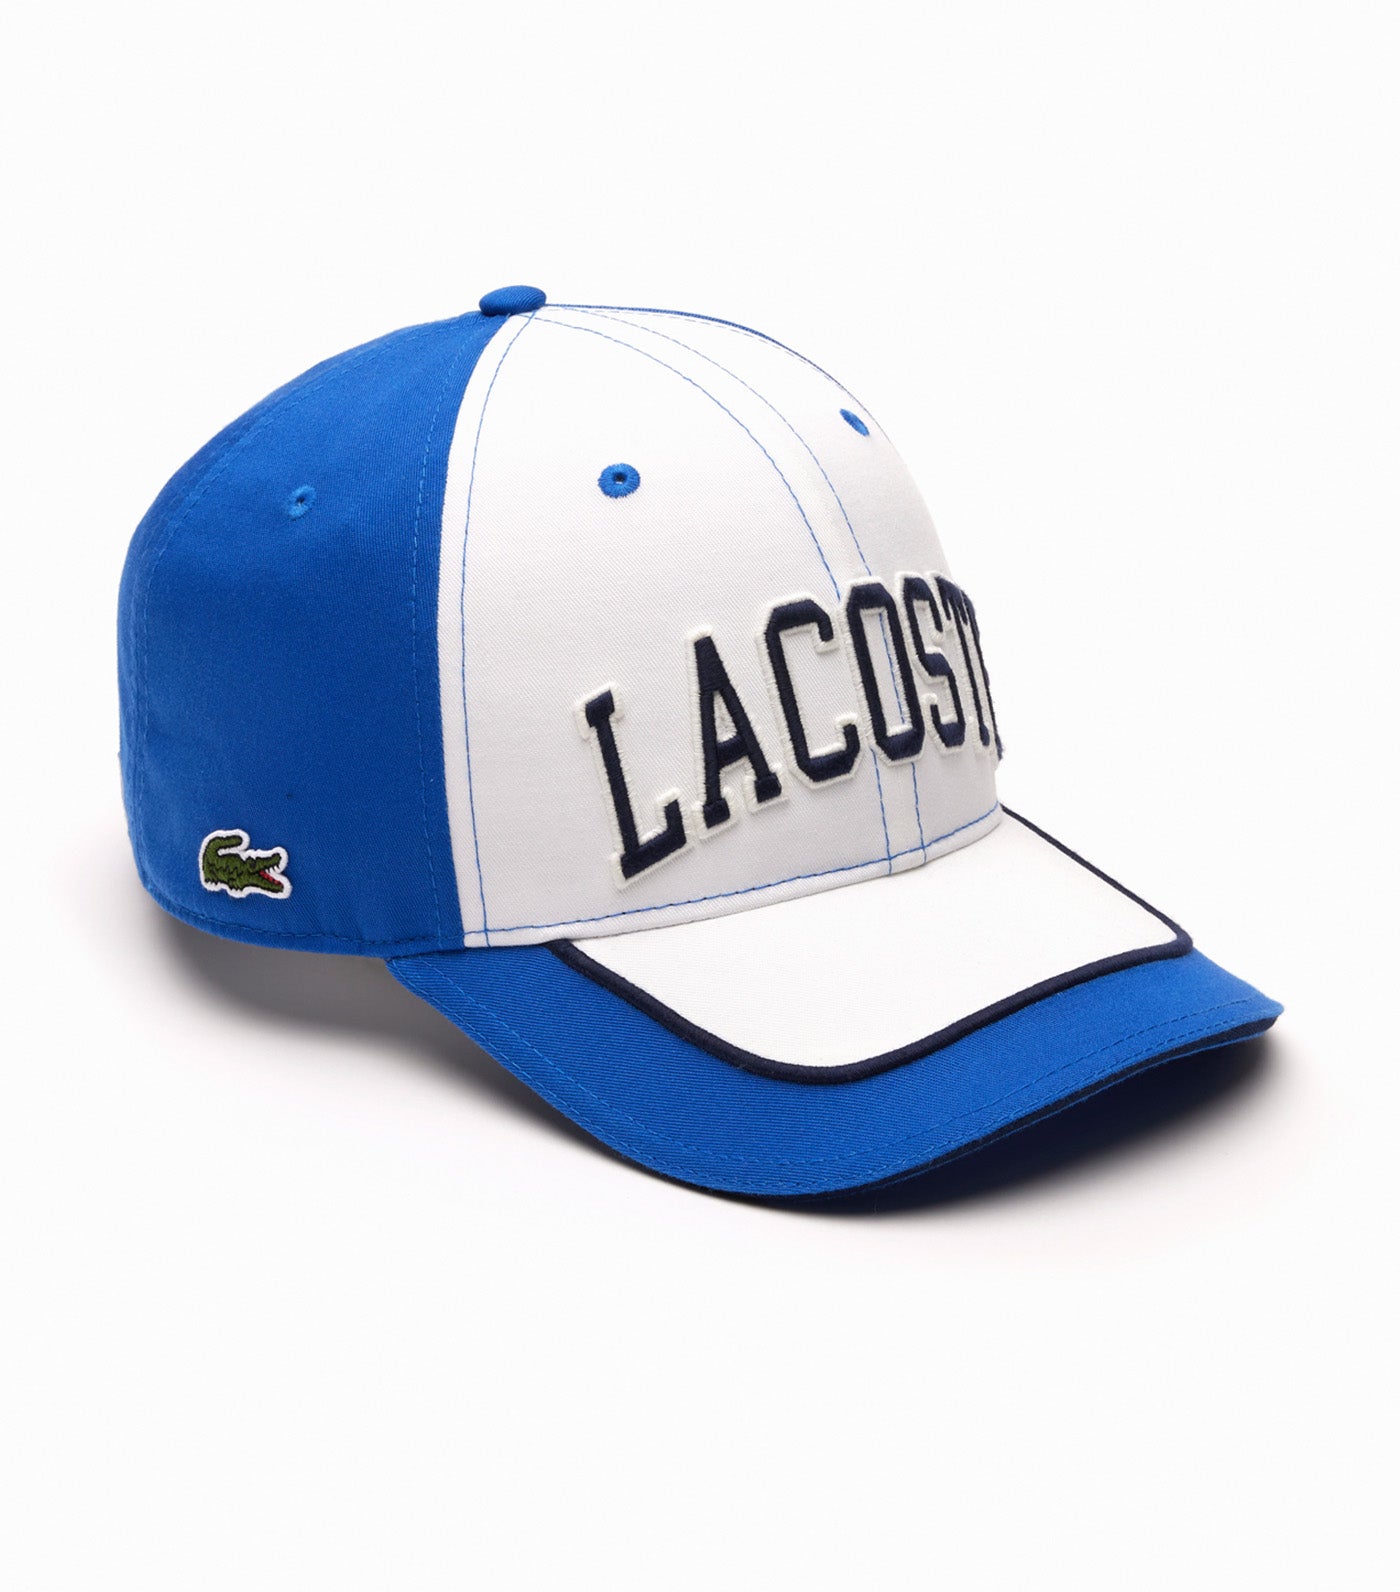 Lacoste 3D Embroidered Baseball Cap Flour/Ladigue-Navy Blue